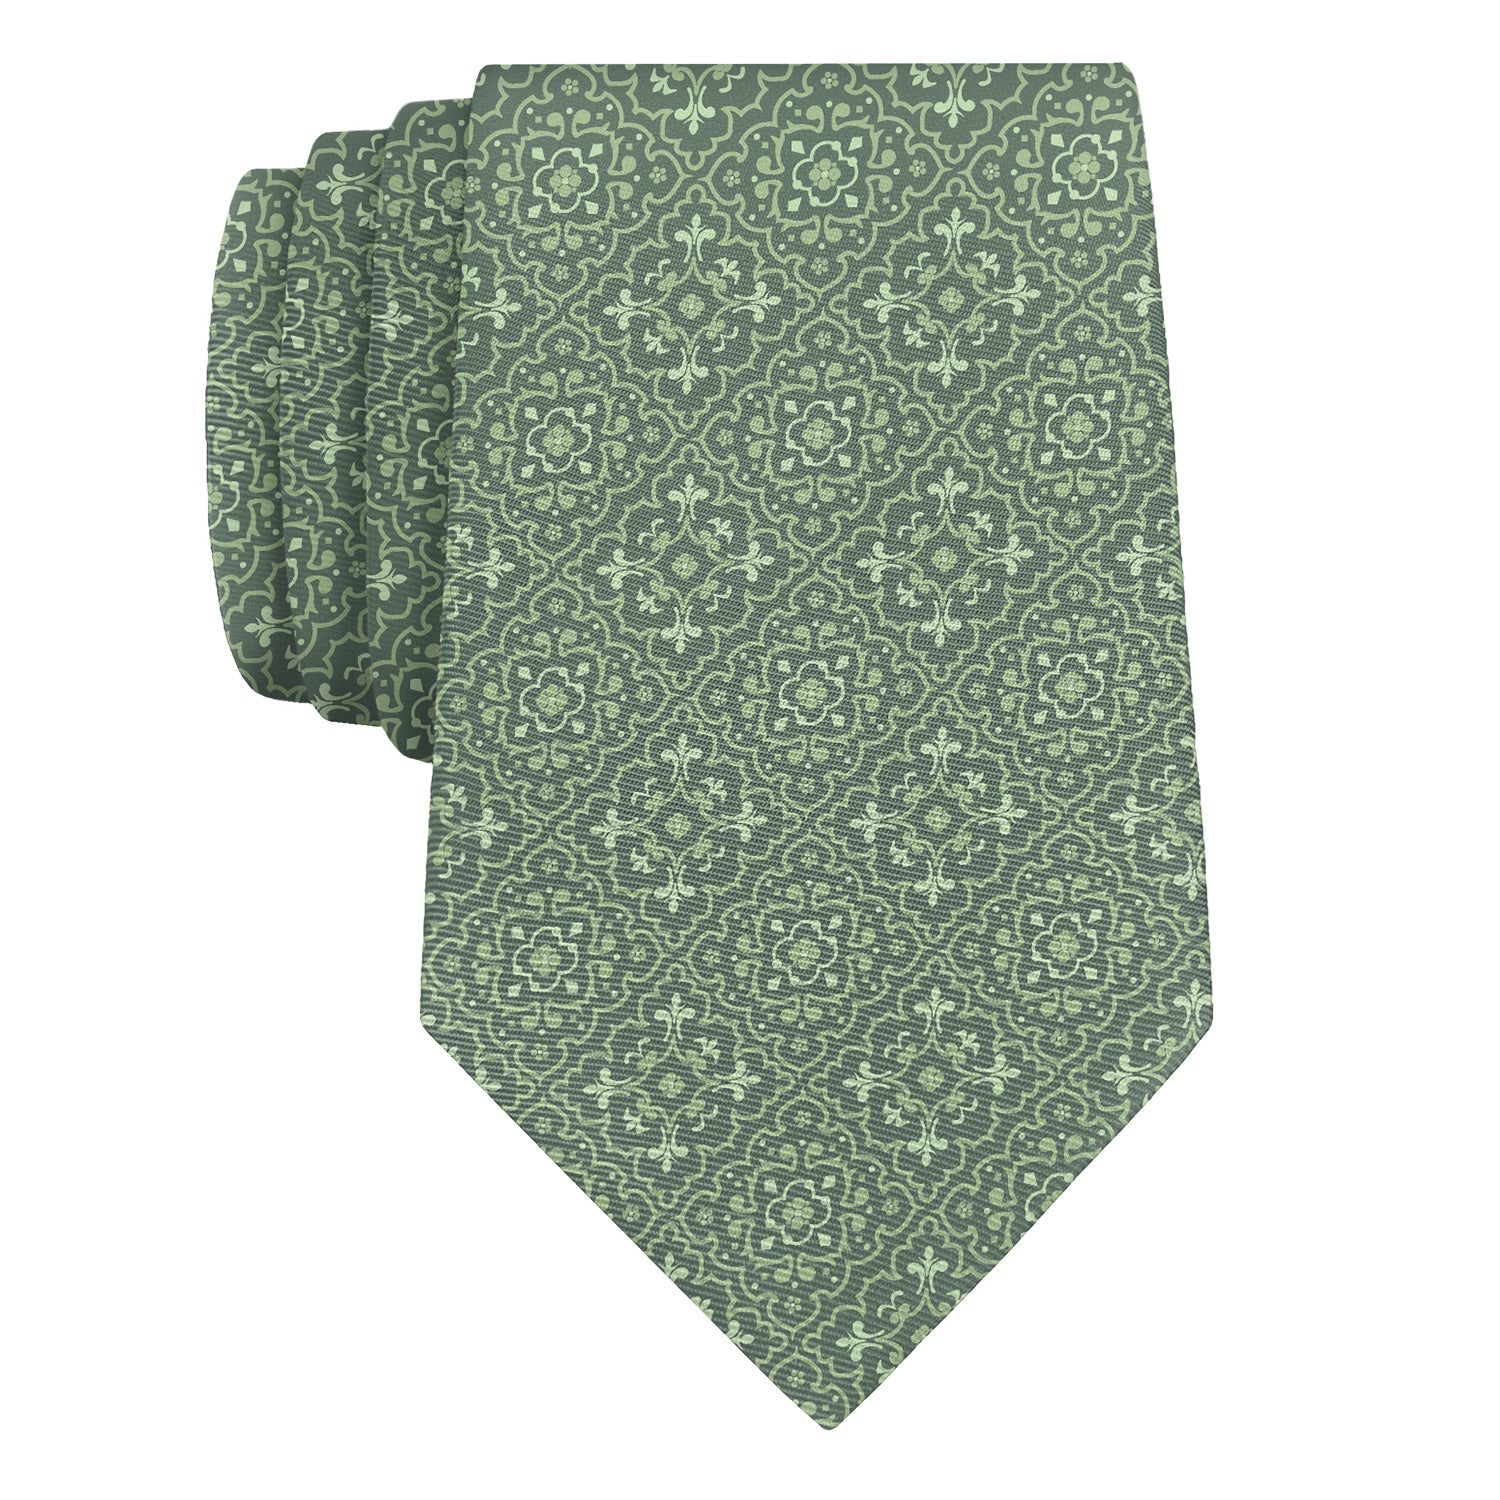 Guilded Medallion Necktie - Rolled - Knotty Tie Co.